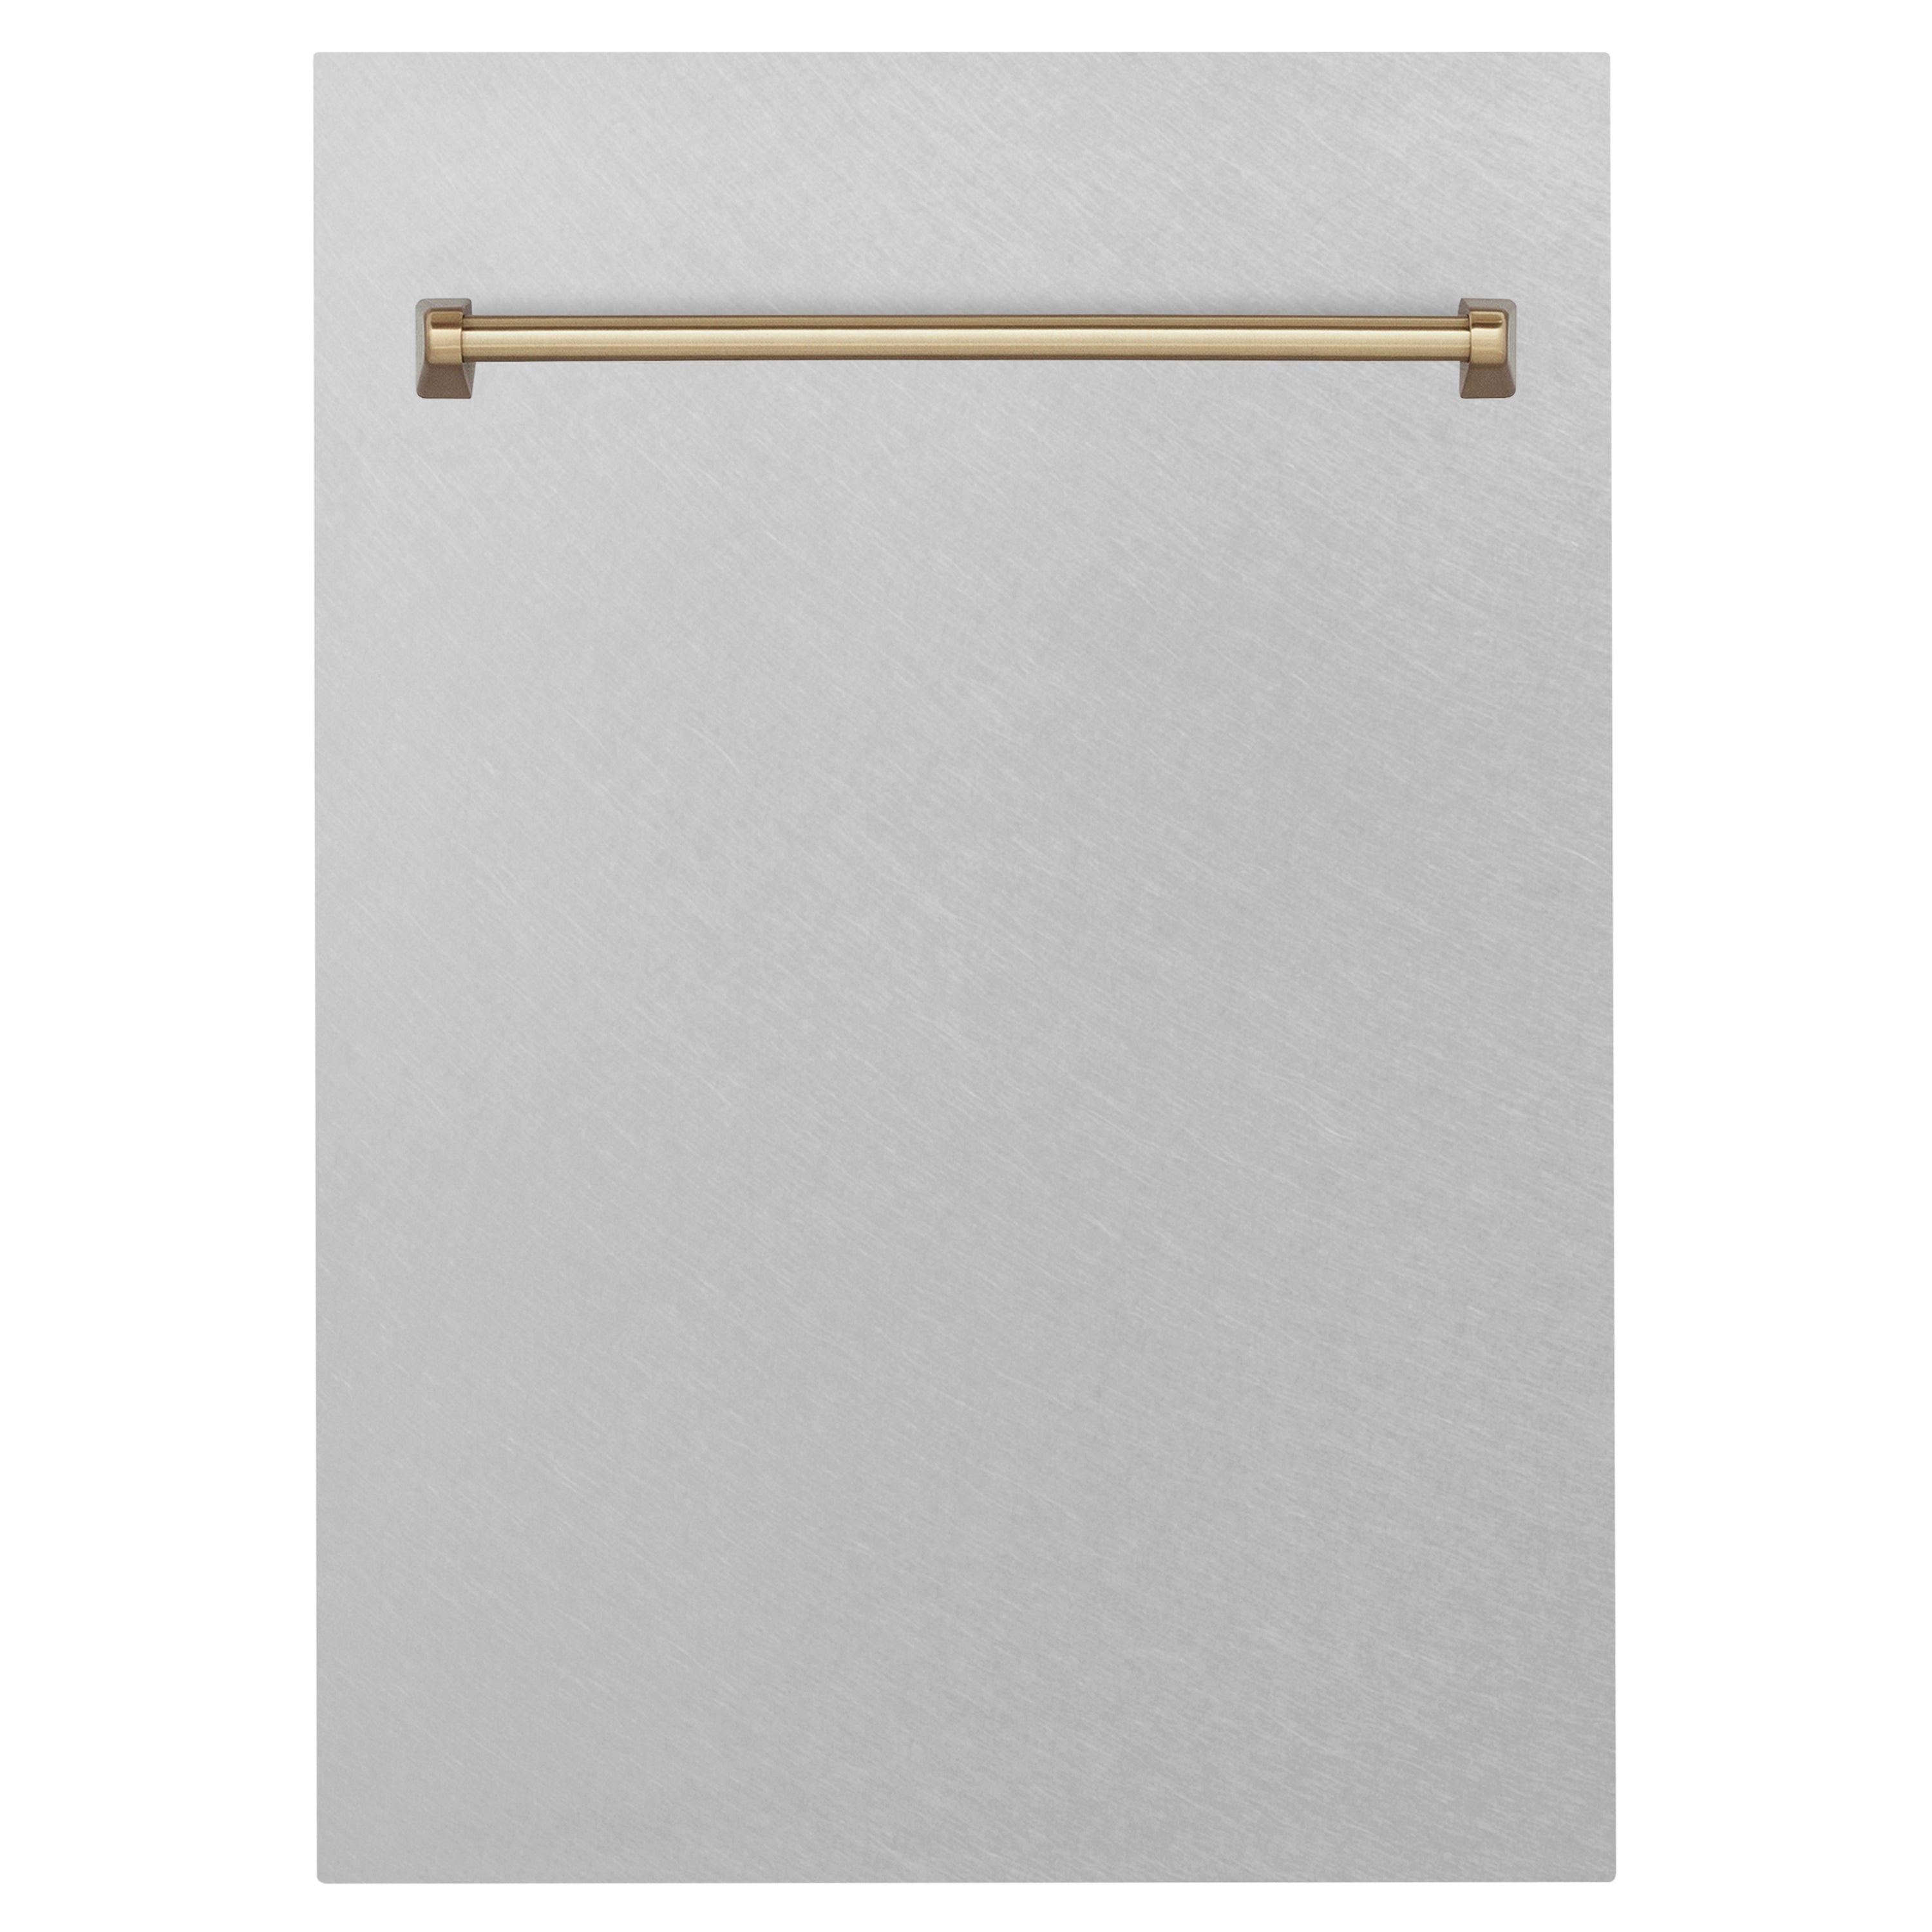 ZLINE 18" Autograph Edition Tallac Dishwasher Panel in Fingerprint Resistant Stainless Steel with Autograph Handle (DPVZ-SN-18)